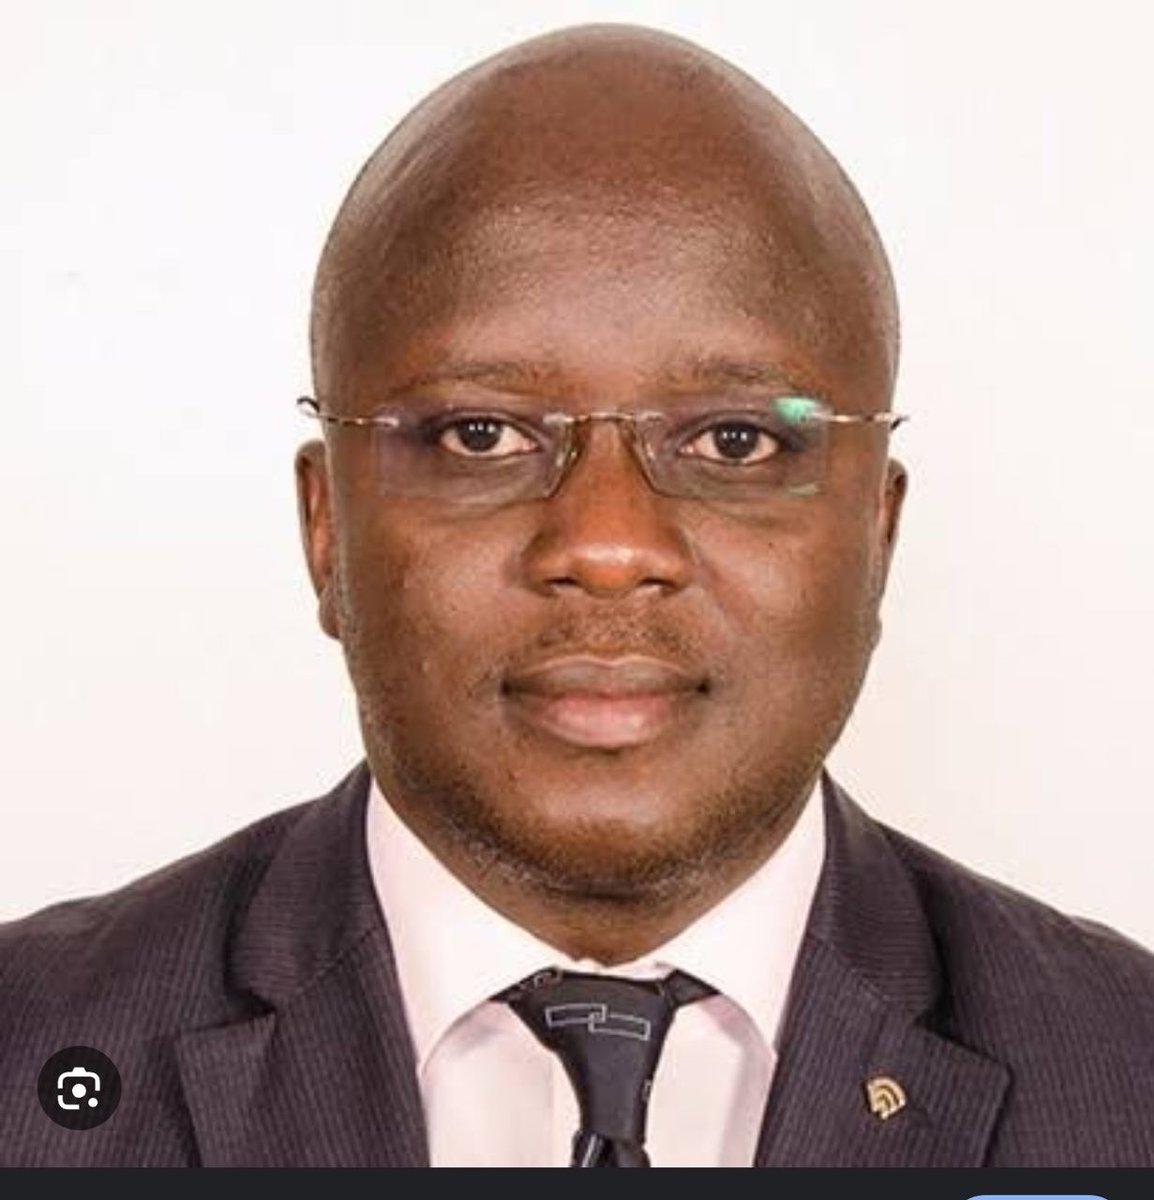 Dr Walter Ongeti appointed the new CEO Kenya National Accreditation Service (KENAS).